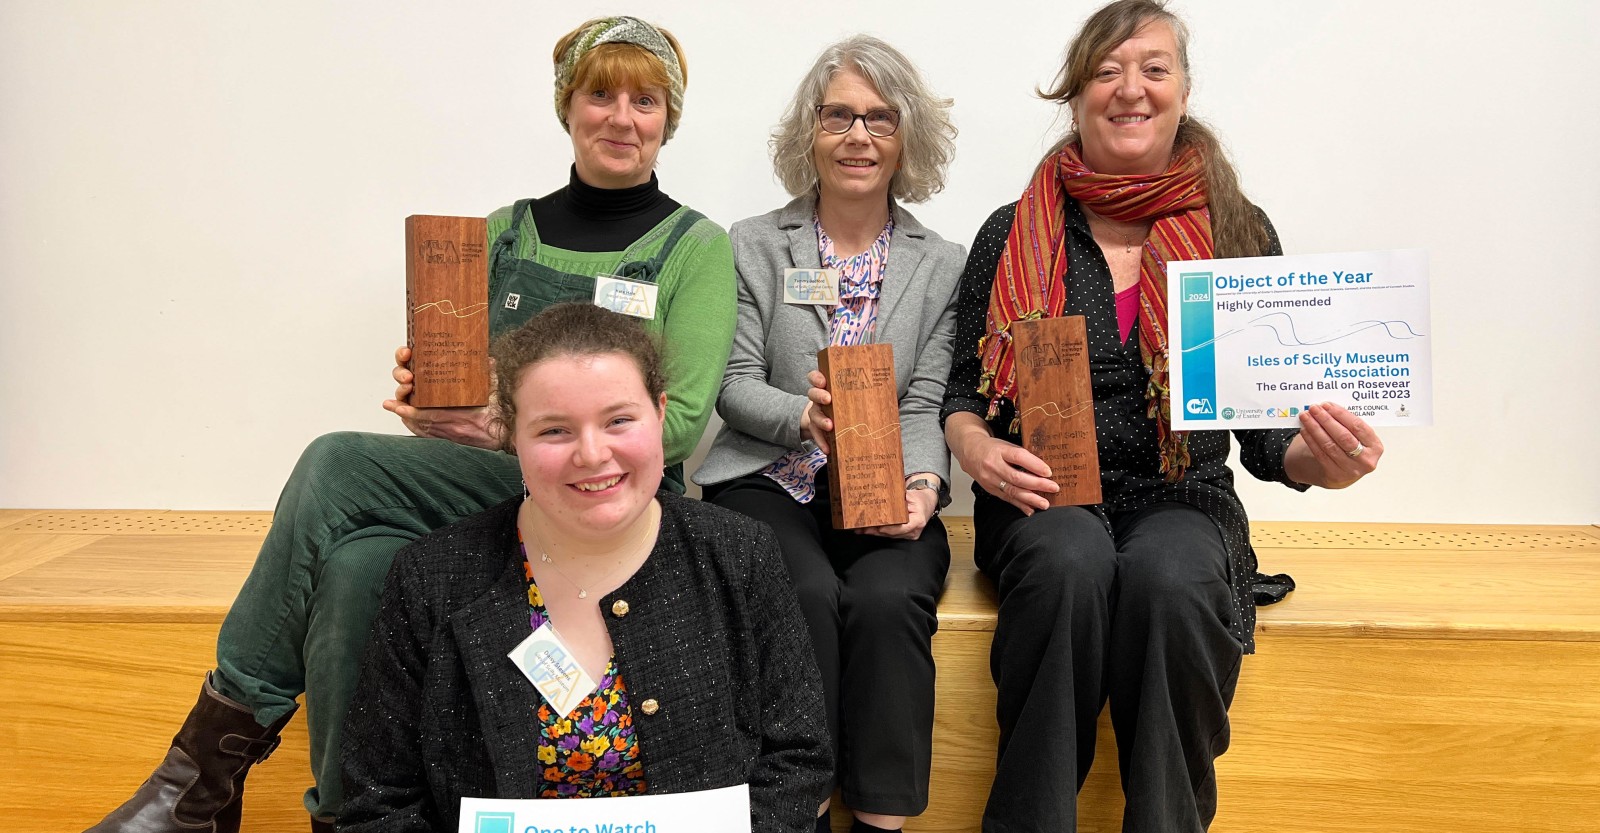 Winners: Daisy Stevens – Young Curators (One to Watch nominee), Kate Hale – Curator/Manager, Isles of Scilly Museum, Bec Applebee – Artistic Director, Grand Ball of Rosevear, Tammy Bedford – Project Co-ordinator, Culture on Scilly  